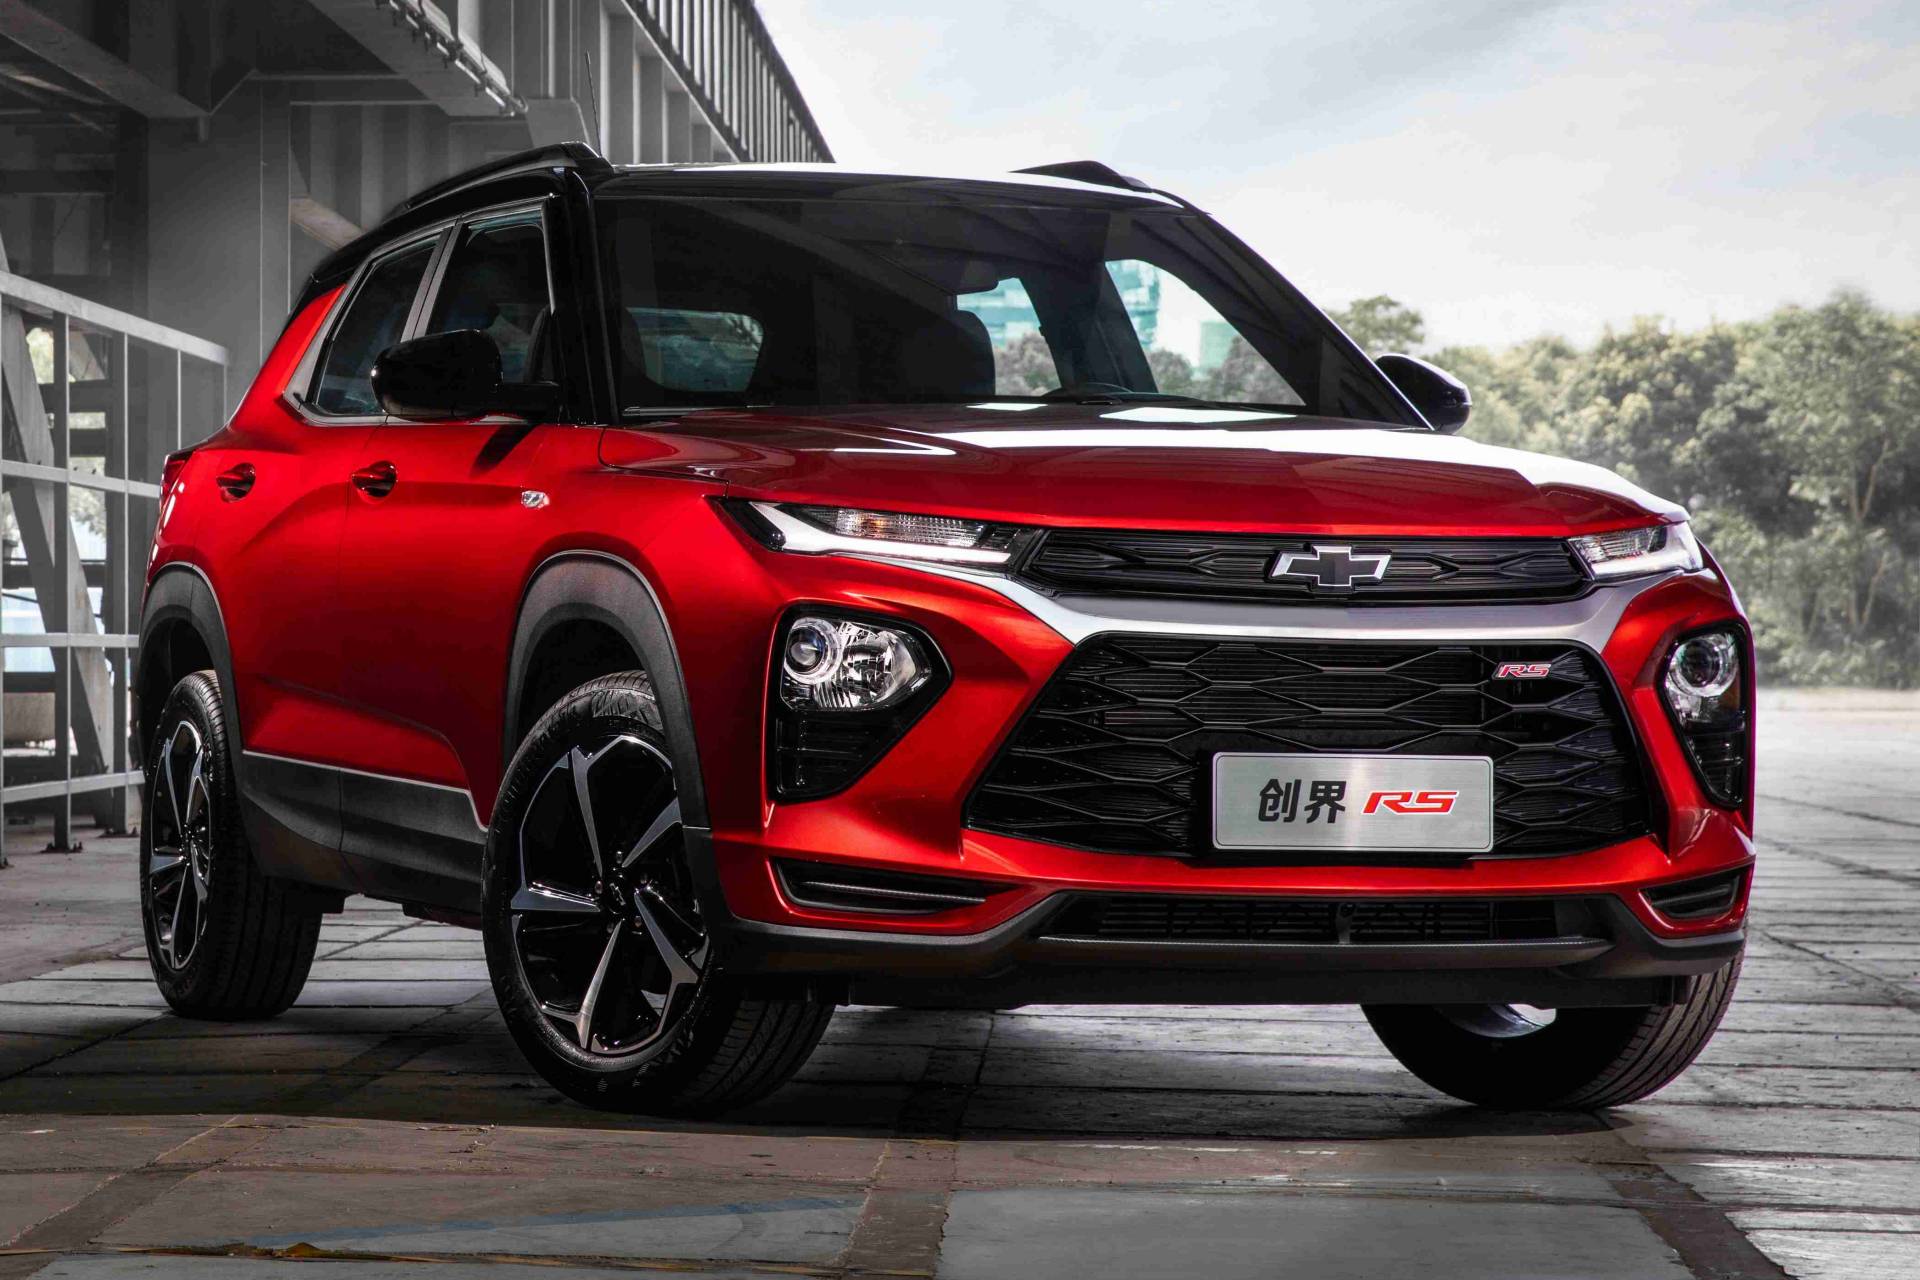 china s 2020 chevy trailblazer launched with 162 hp 1 3l turbo carscoops china s 2020 chevy trailblazer launched